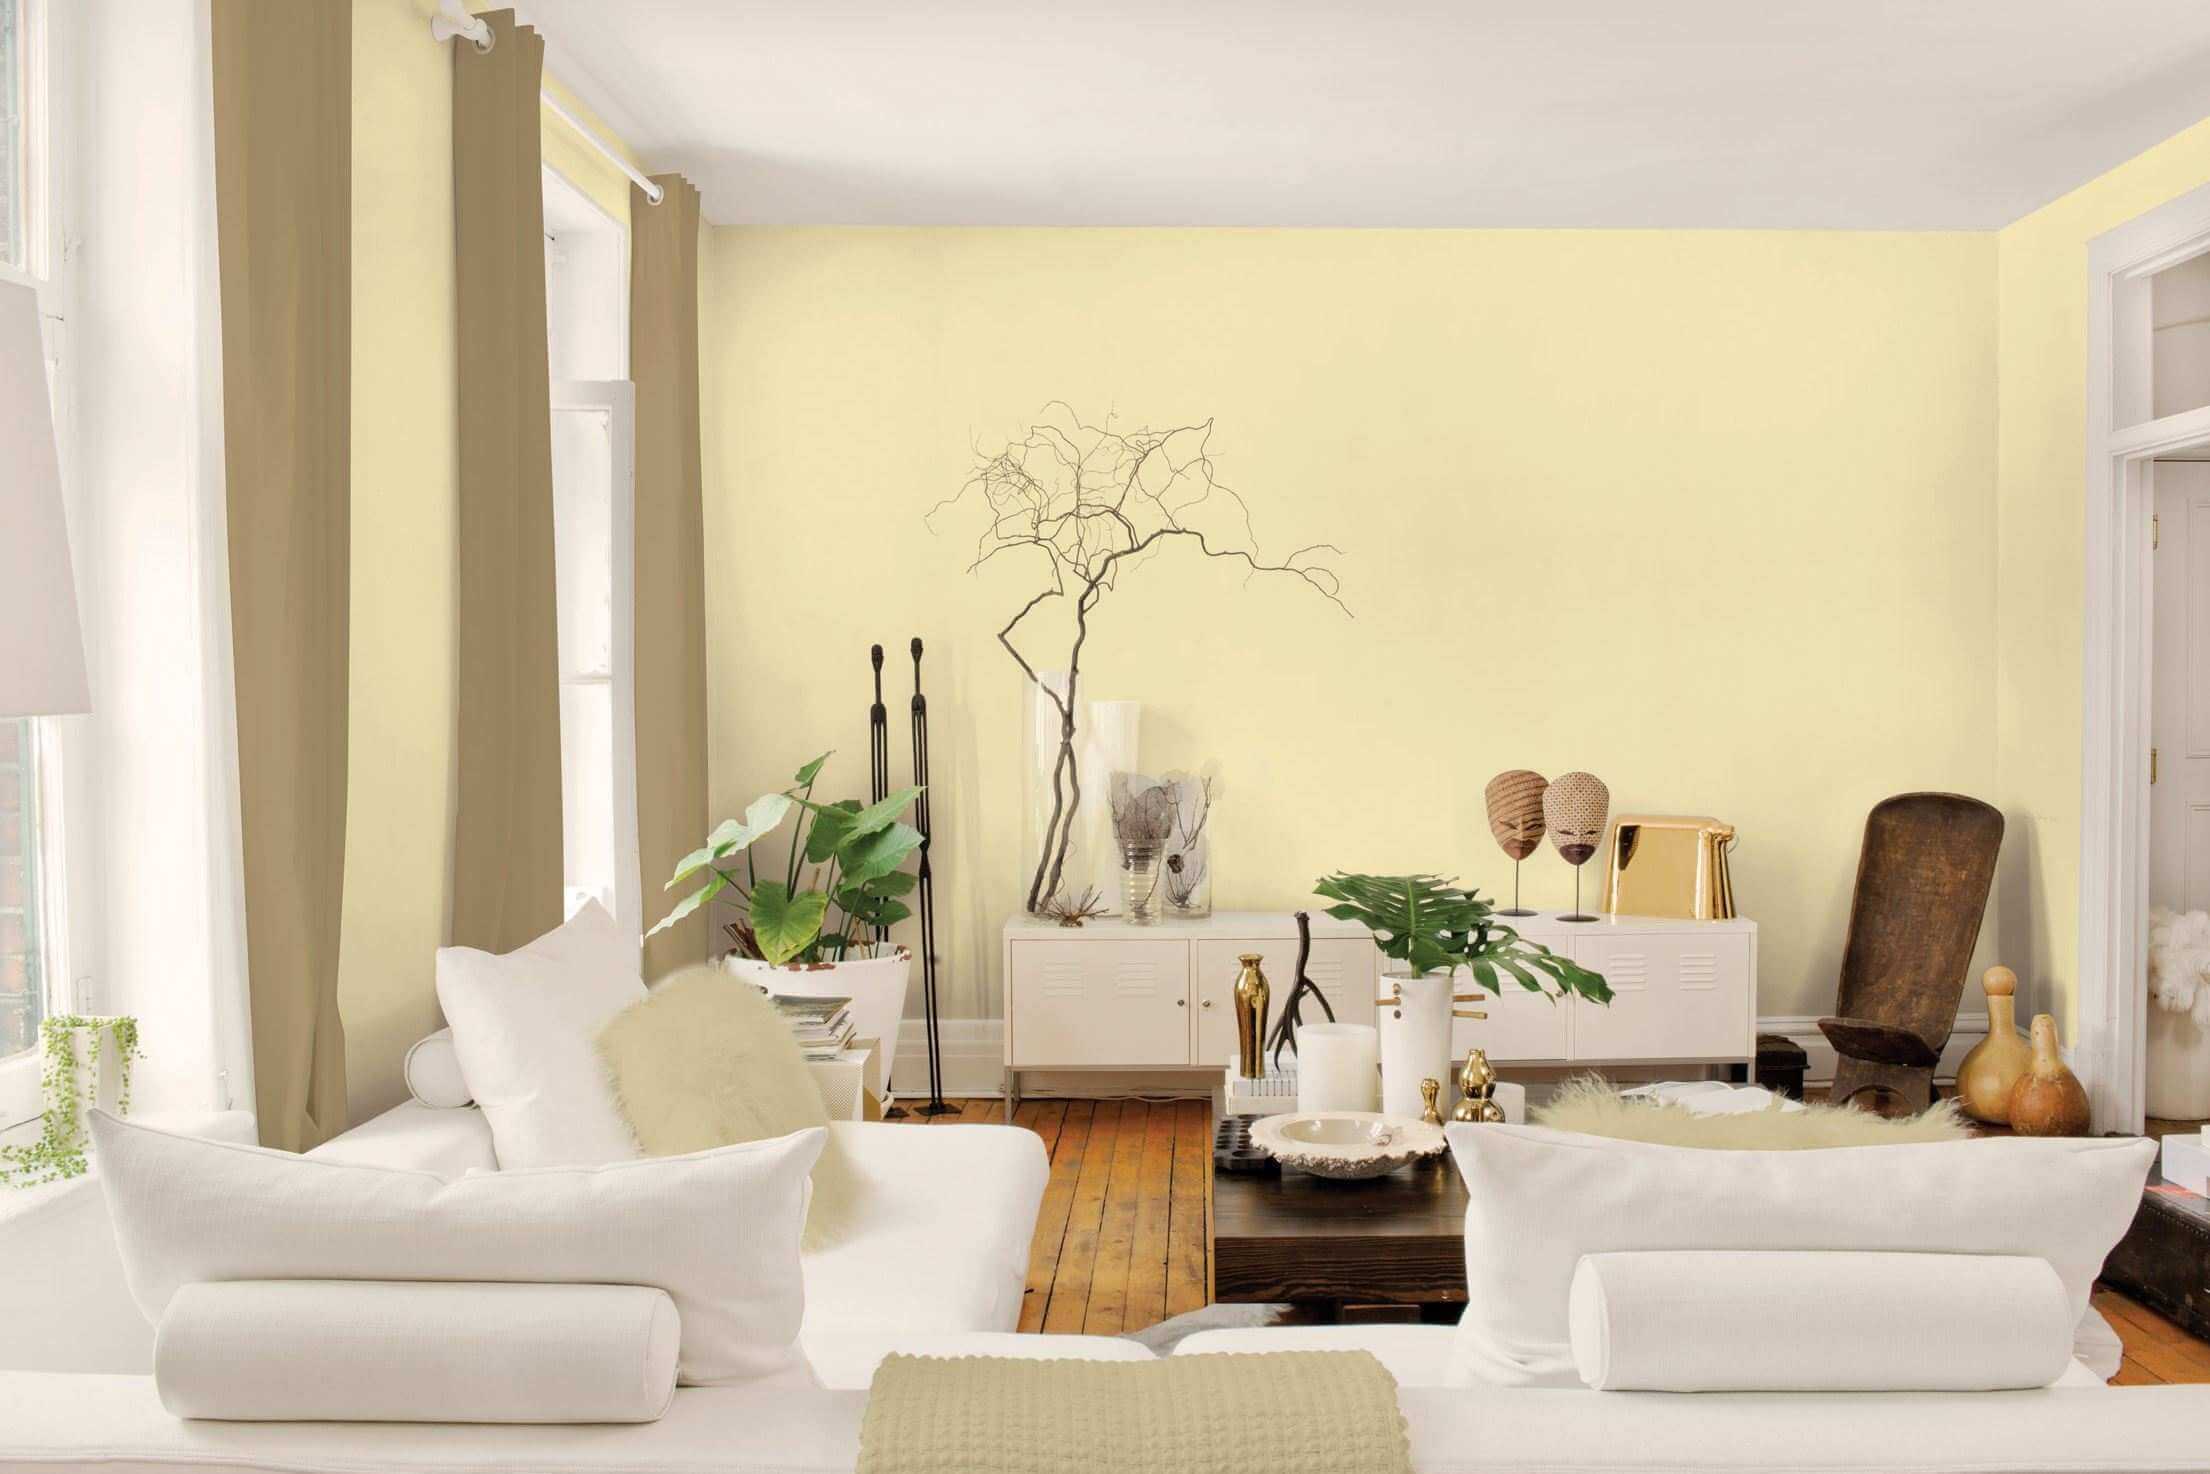 1- What is the best color of paint to paint the room